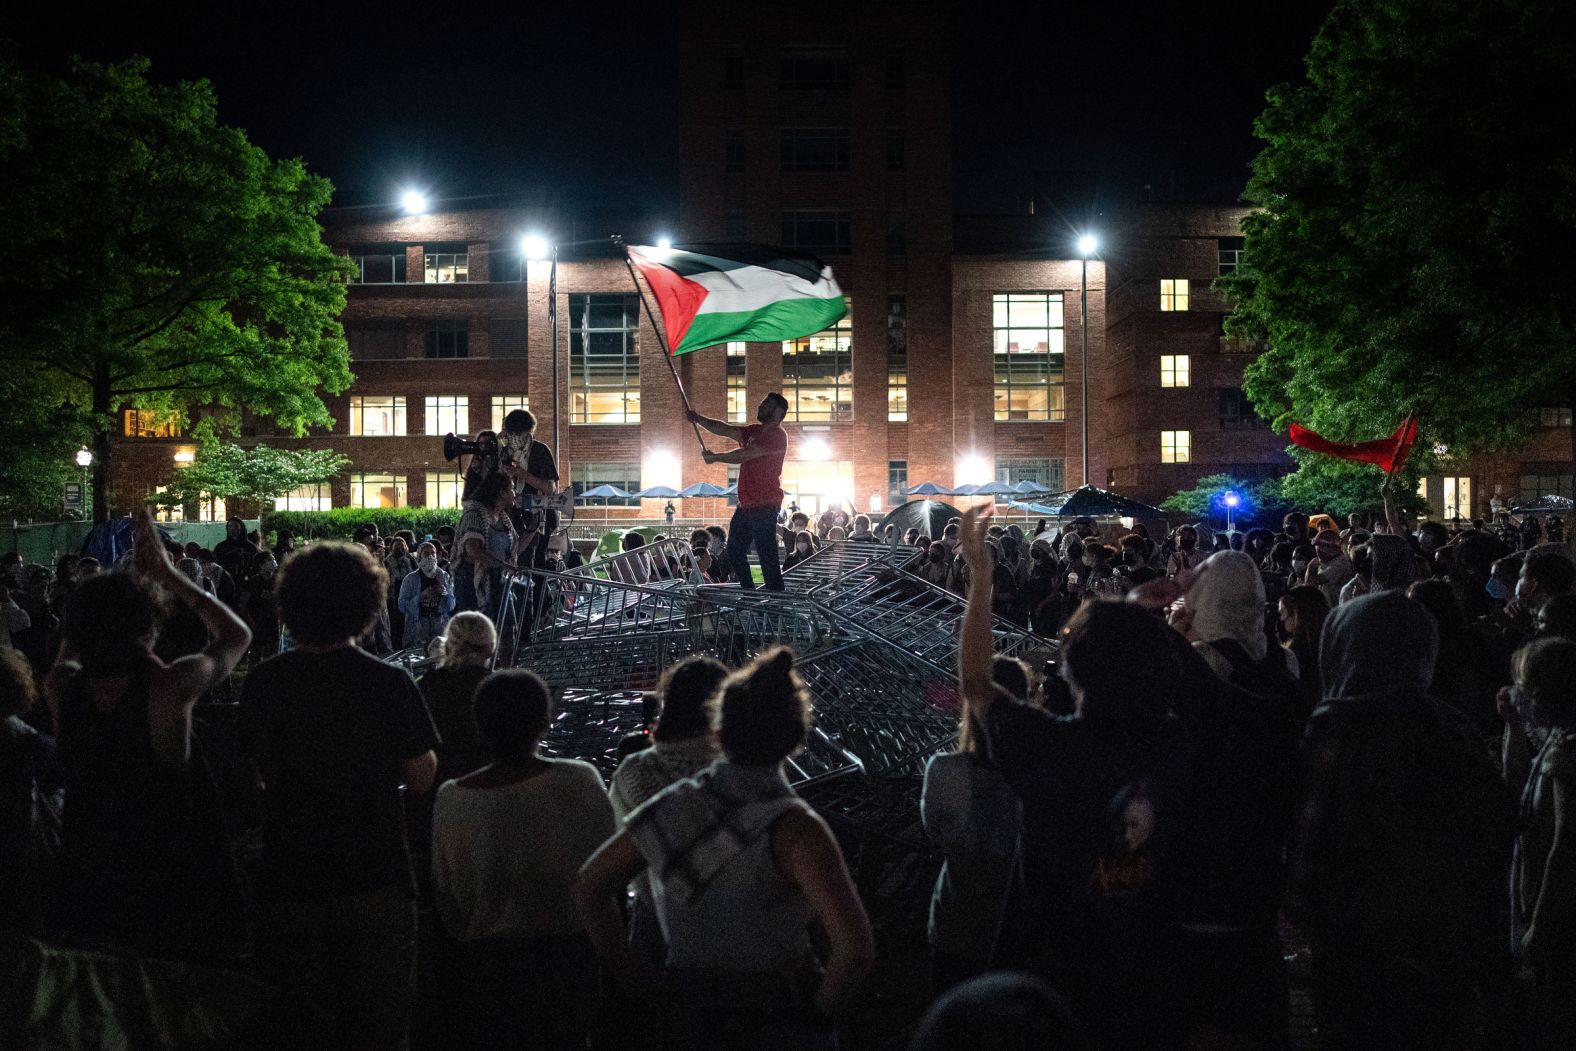 A man holds up a Palestinian flag during a protest at George Washington University in Washington, DC, on Monday, April 29.